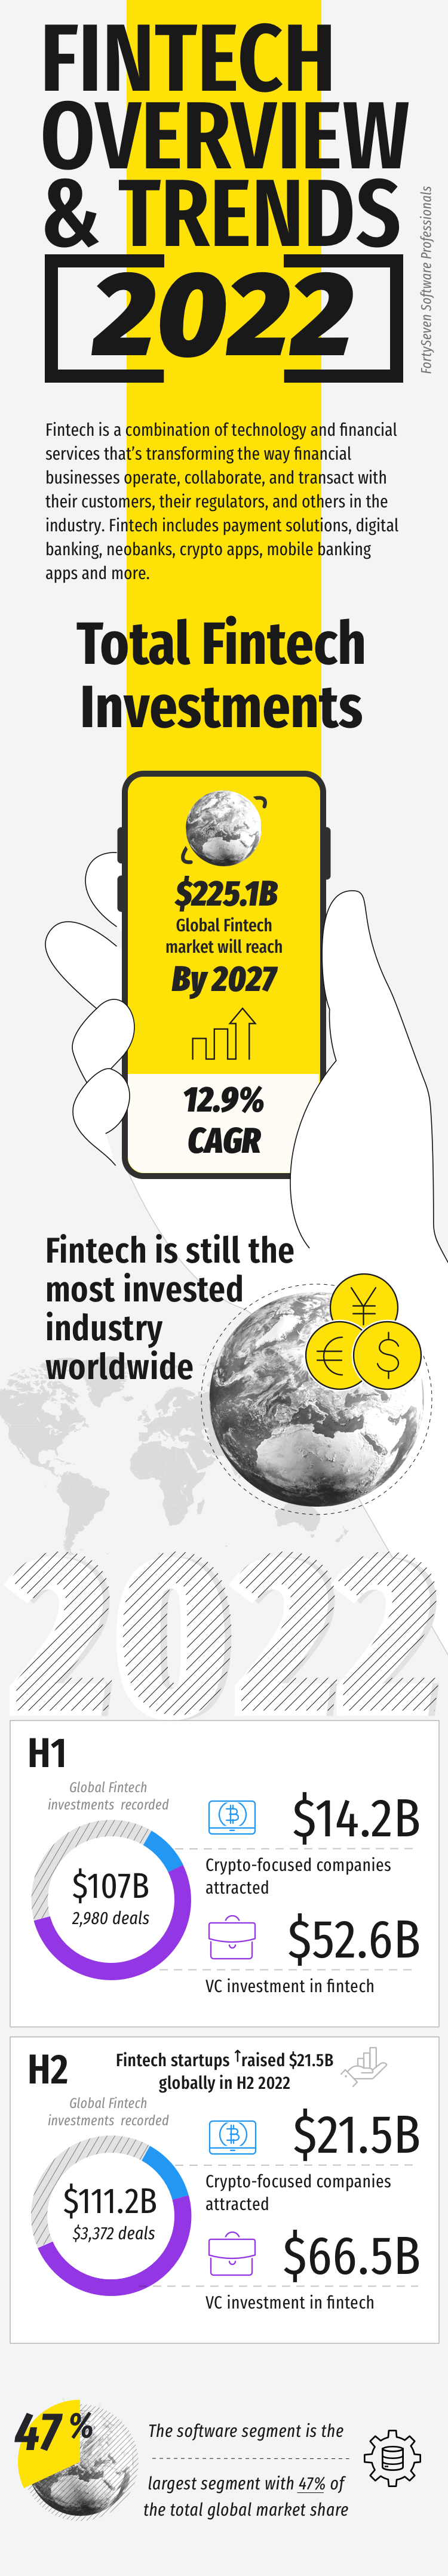 Infographic: Fintech Overview & Trends 2022 - 2022 - 17